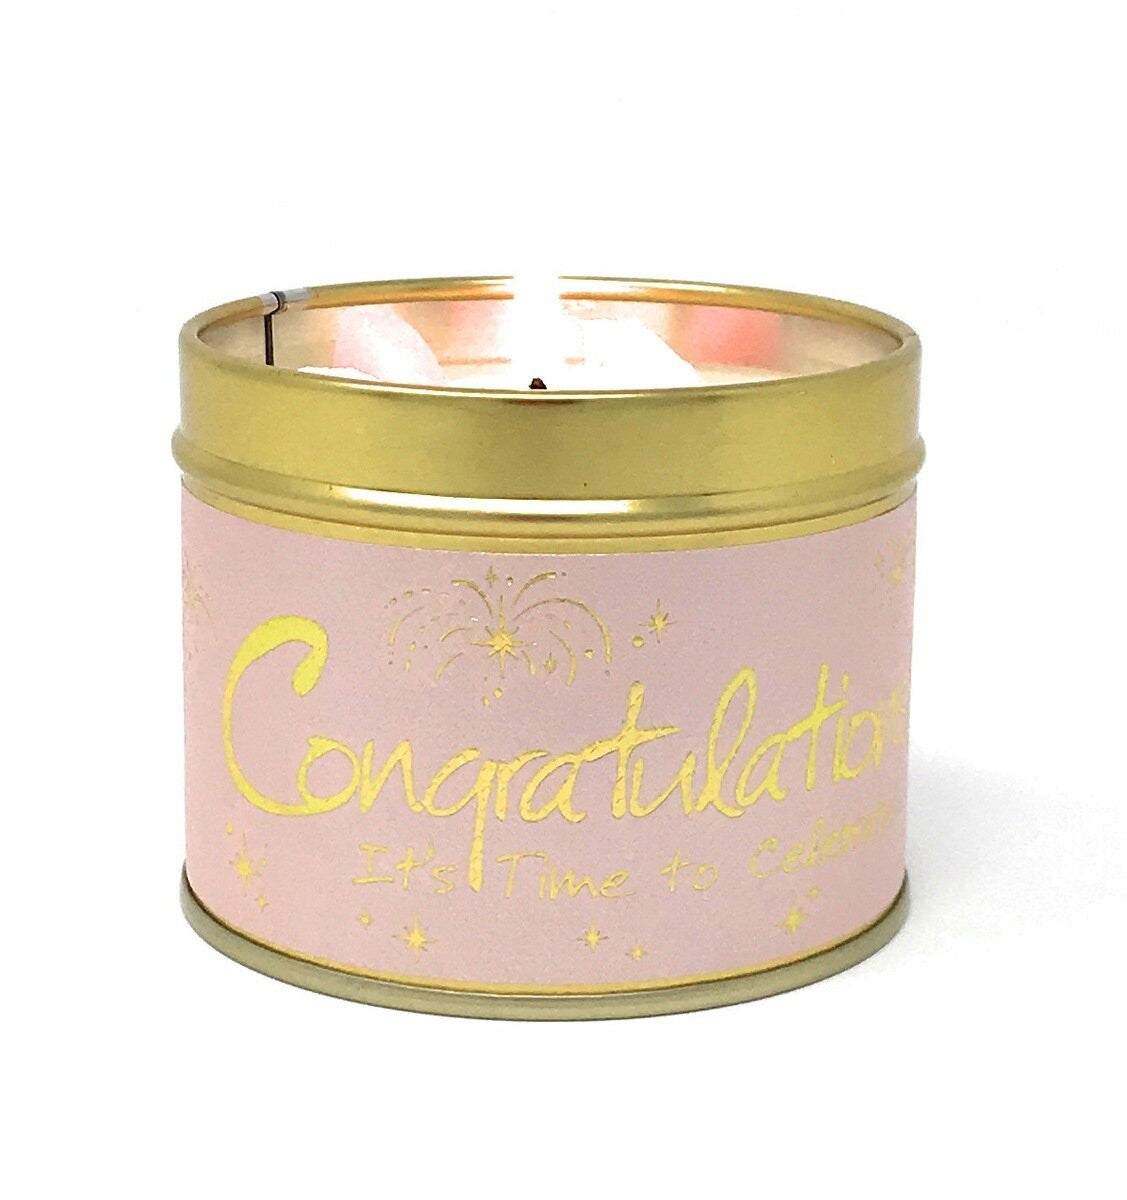 Congratulations! Scented Candle from Lily-Flame. Handmade in England